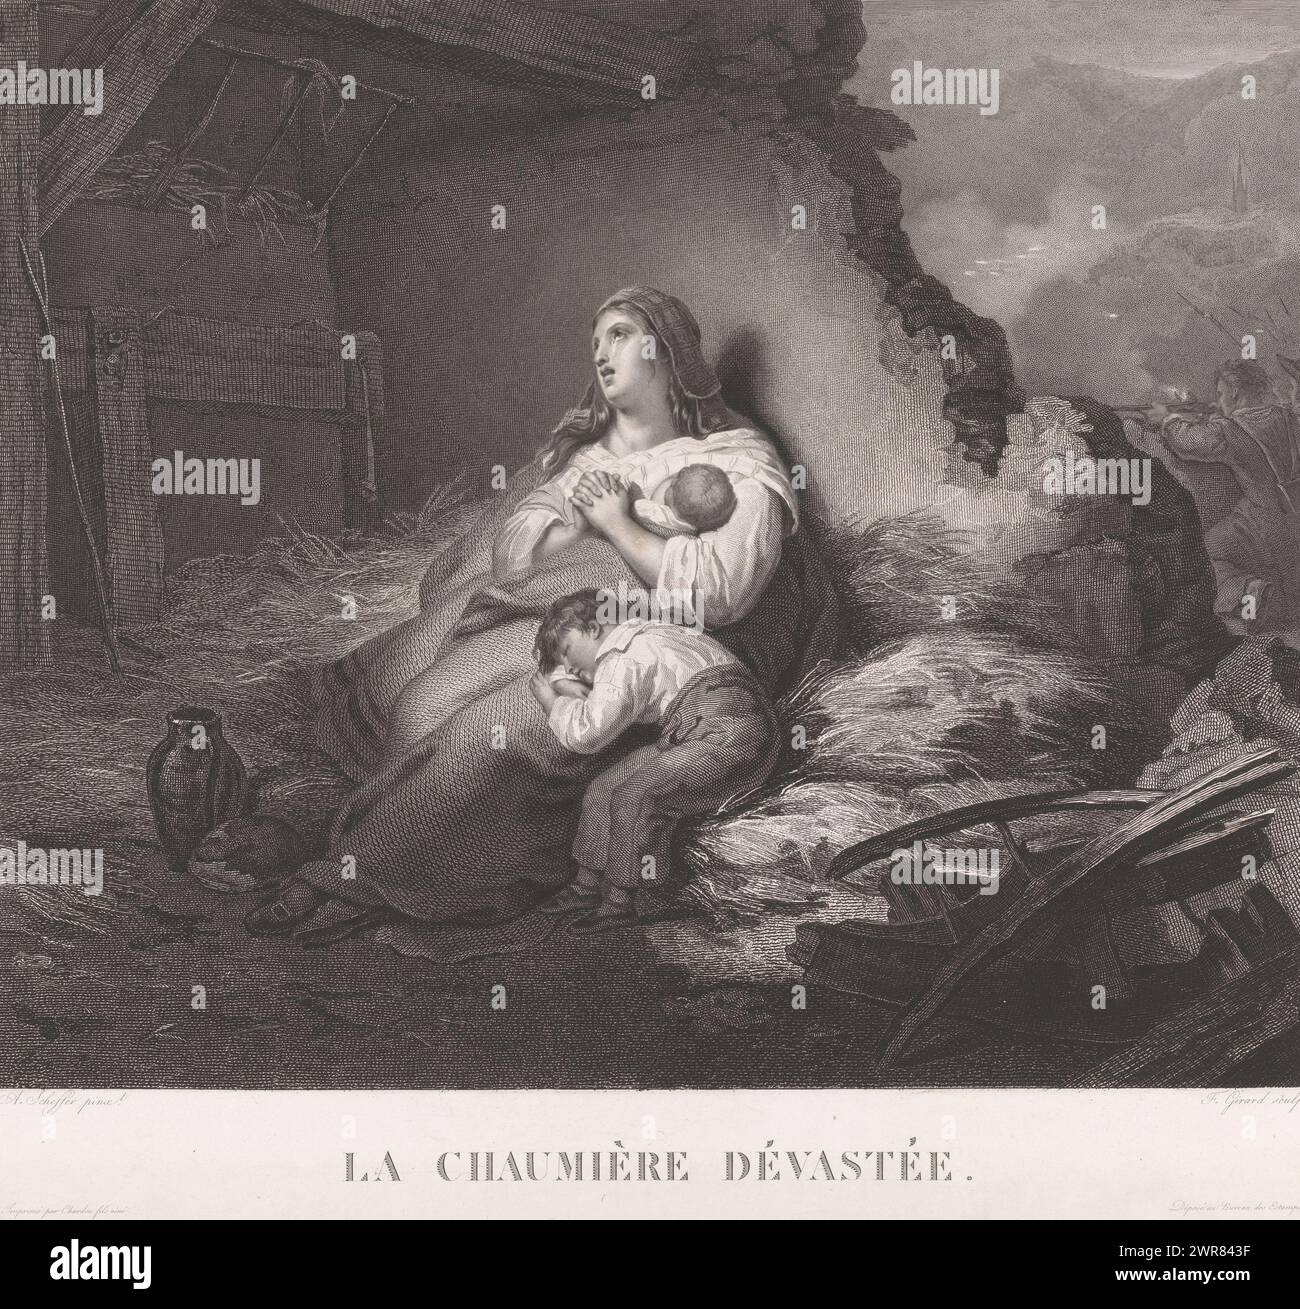 Crying woman with two children, La chaumière dévastée (title on object), A crying woman with two children sits in a destroyed house or stable. Shooting soldiers can be seen in the background on the right., print maker: Alexis François Girard, after painting by: Ary Scheffer, printer: Chardon fils, Paris, 1825 - 1852, paper, engraving, etching, height 471 mm × width 534 mm, print Stock Photo